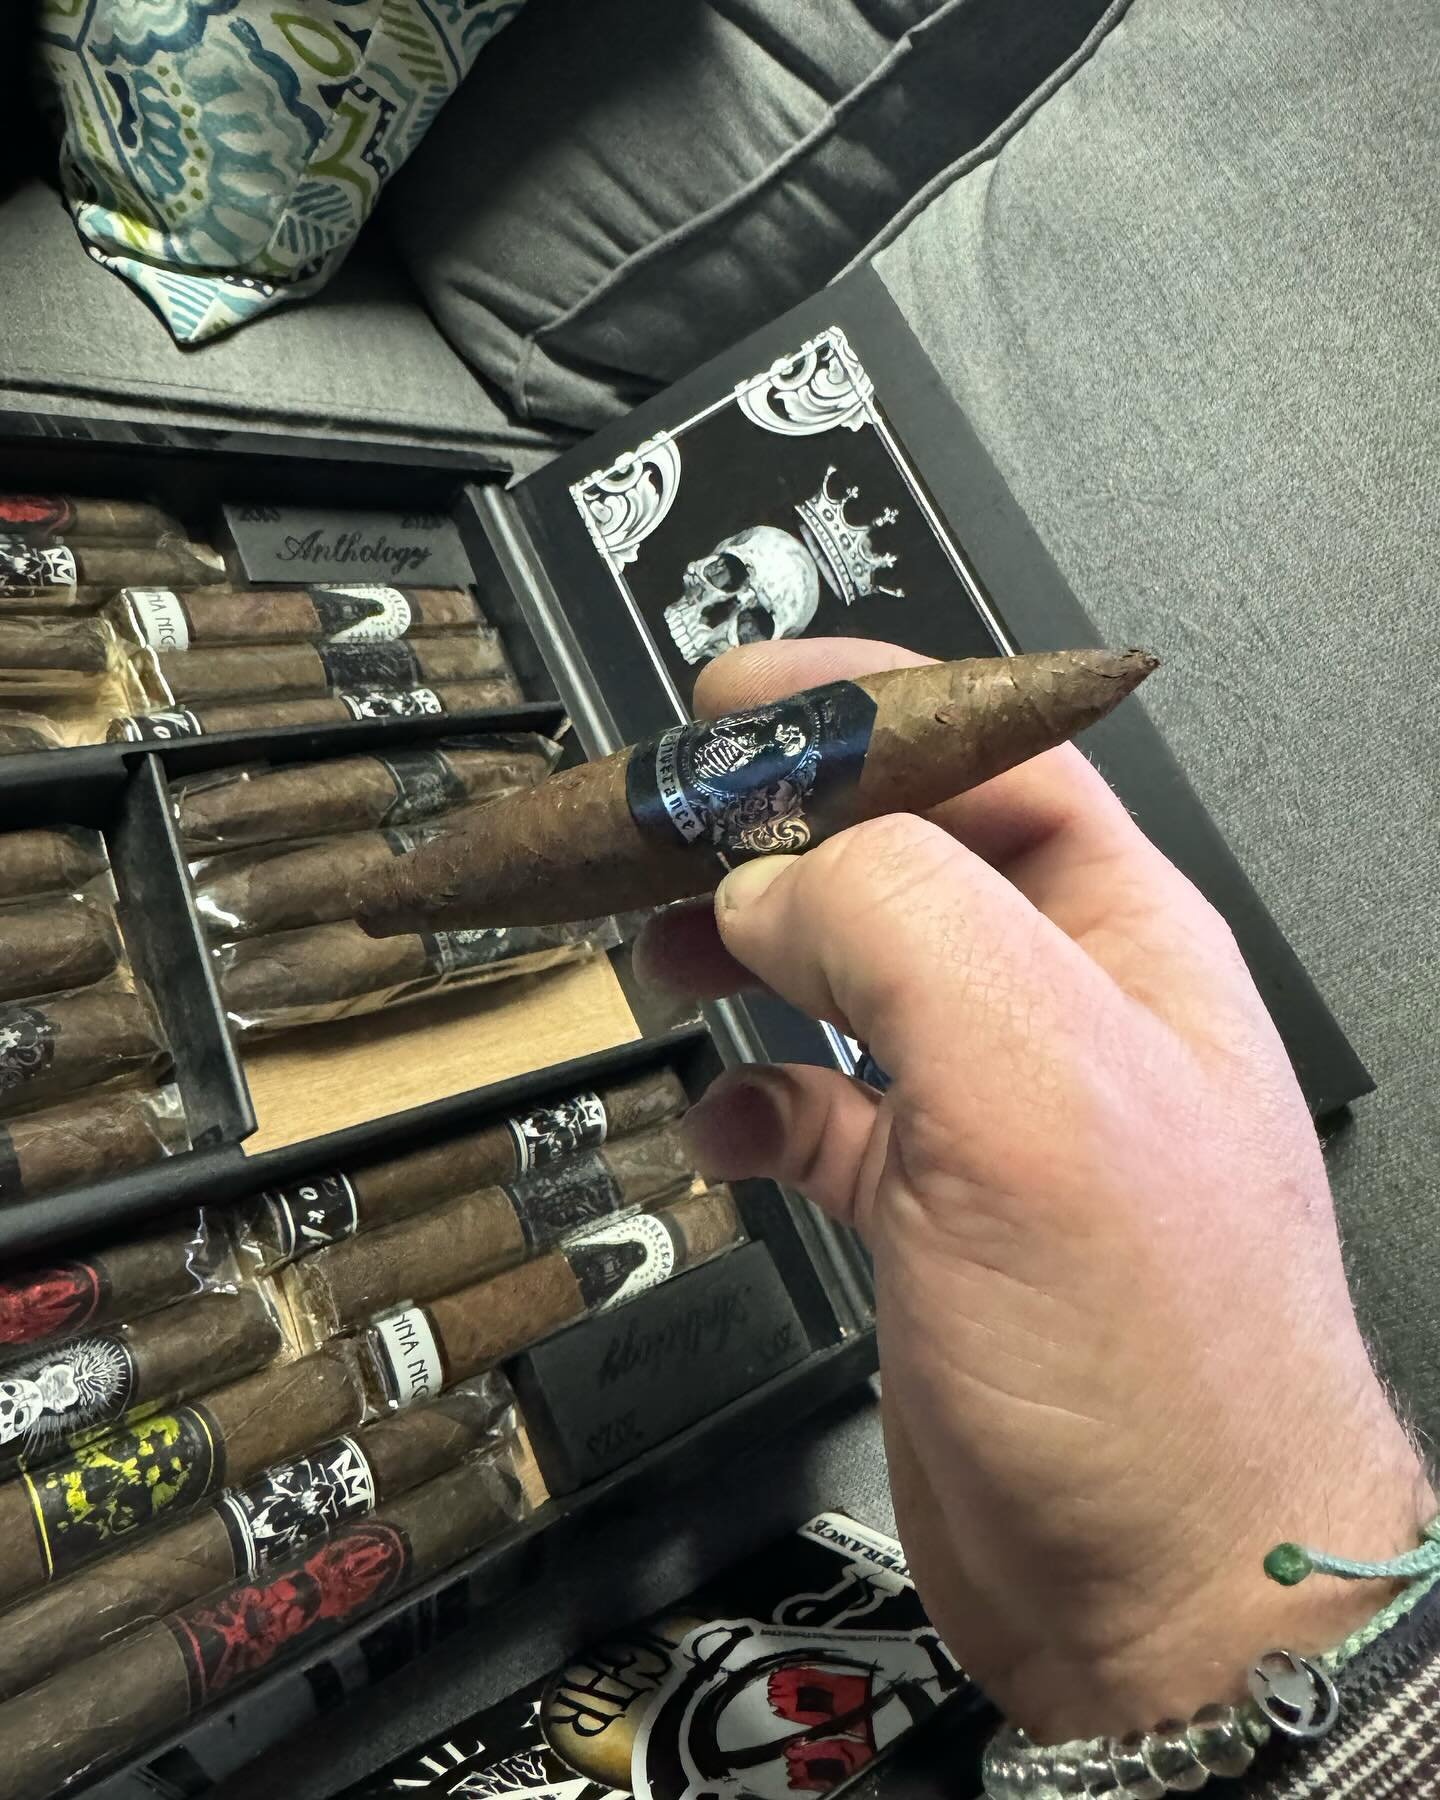 The offerings inside of this beautiful collection from @blacklabeltradingco are downright un matched!!!
-
🤙🏻🏴&zwj;☠️🤙🏻🏴&zwj;☠️
-
On the podcast this week we dig into this intimate collection! What&rsquo;s your favorite Oveja Negra made cigar?